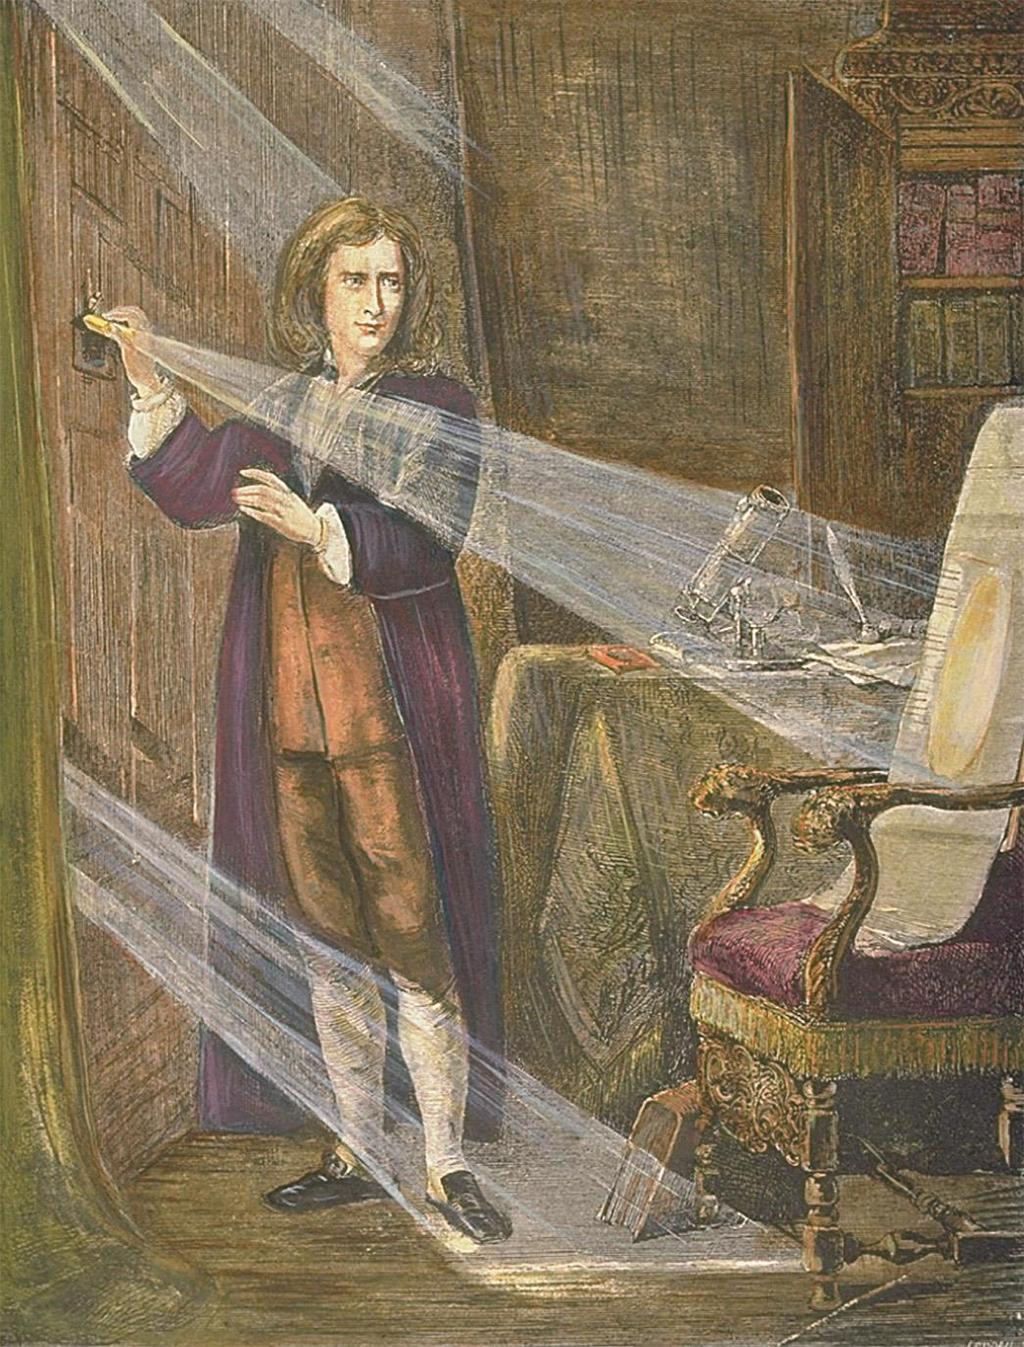 Sir Isaac Newton s experiments dealing with light passing through a prism